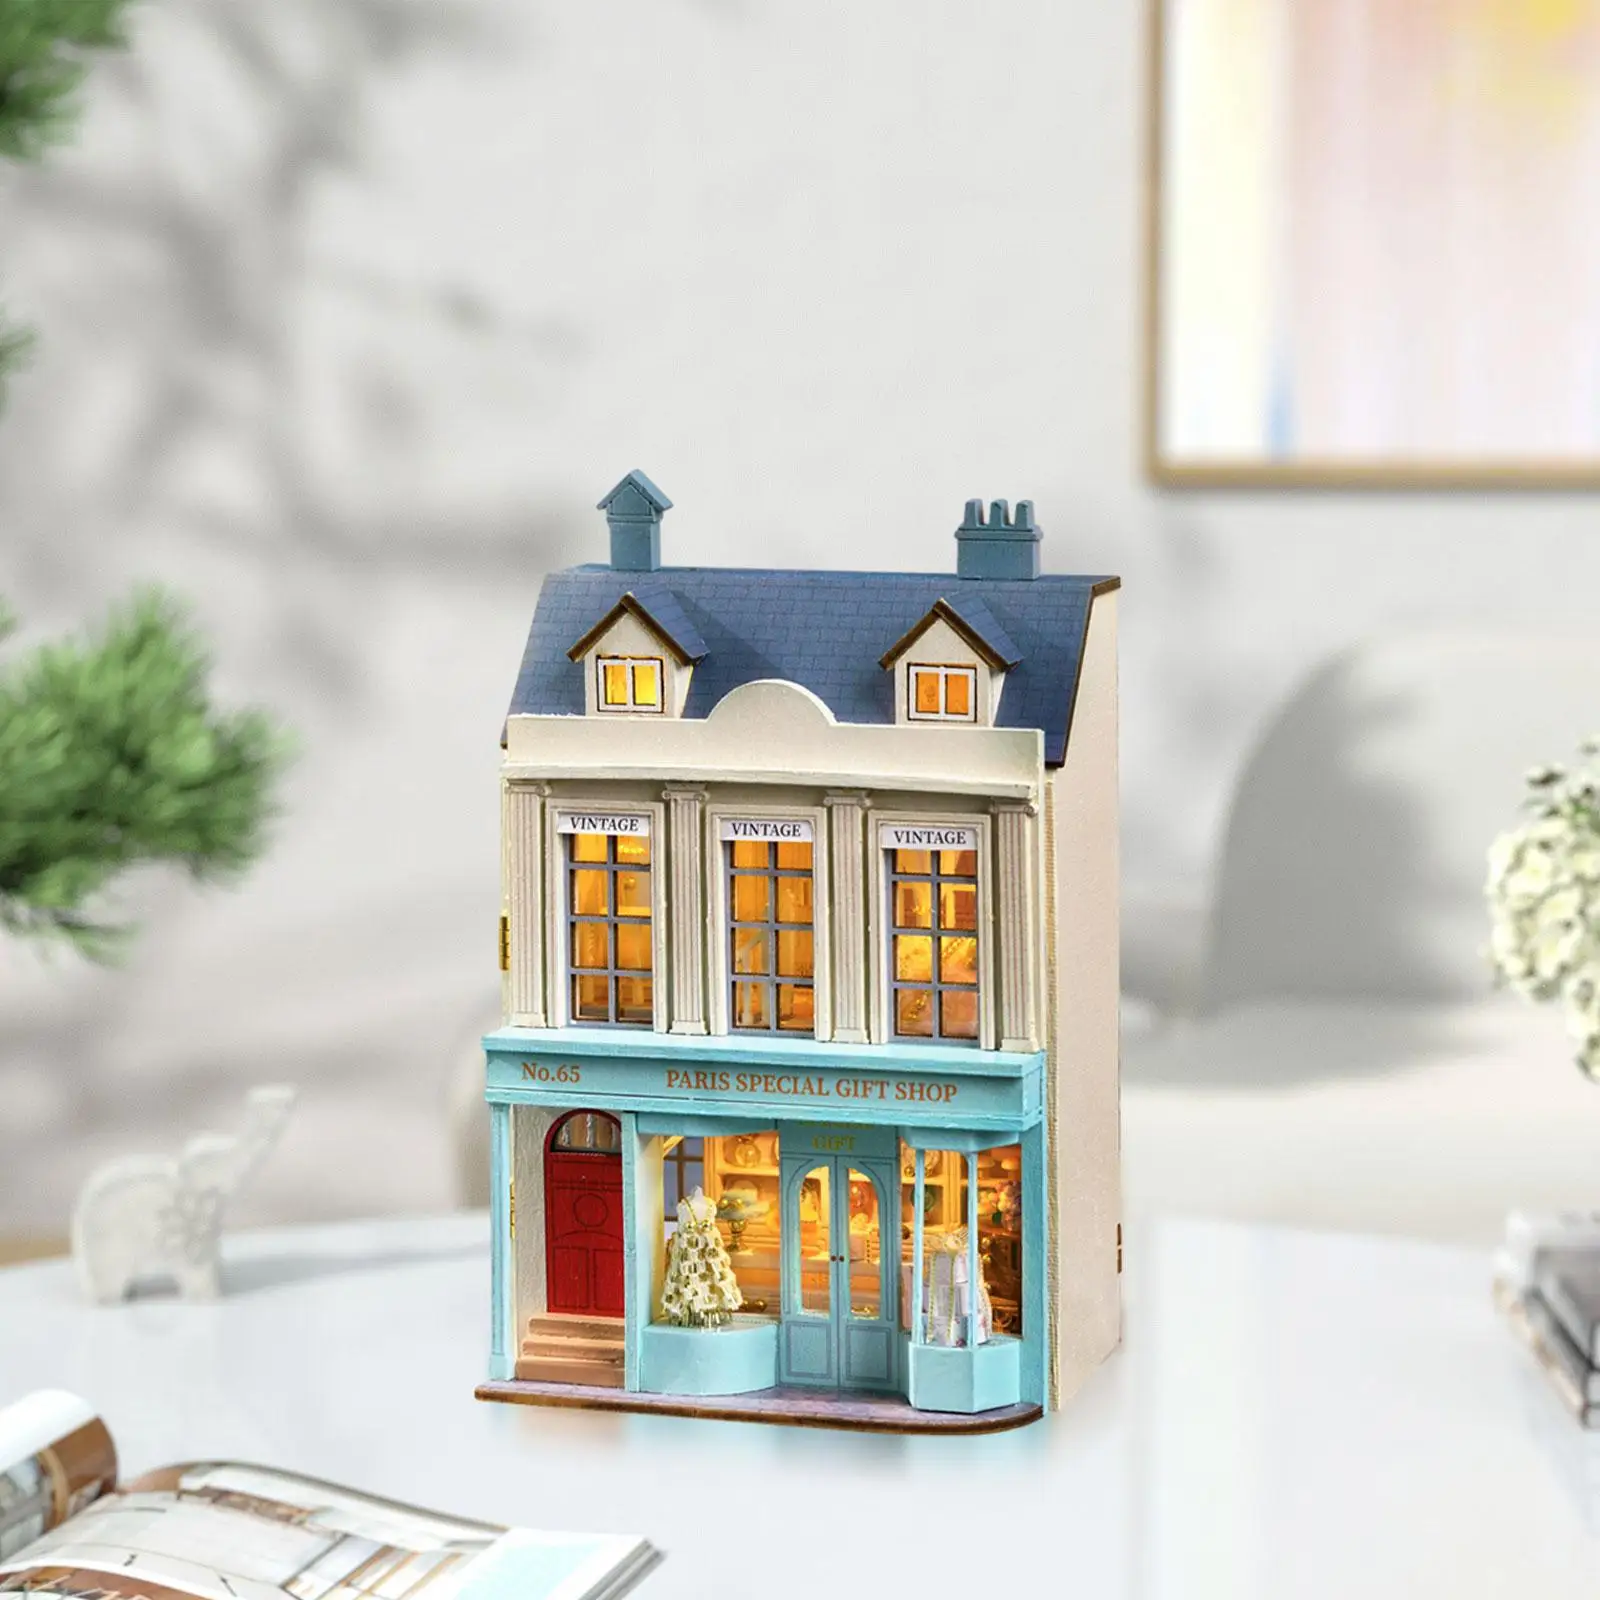 

DIY Miniature Dollhouse Kits Crafts Can Open and Close 3D Puzzle Woodcrafts Toy for Friends Teens Family Boy Girls Holiday Gifts